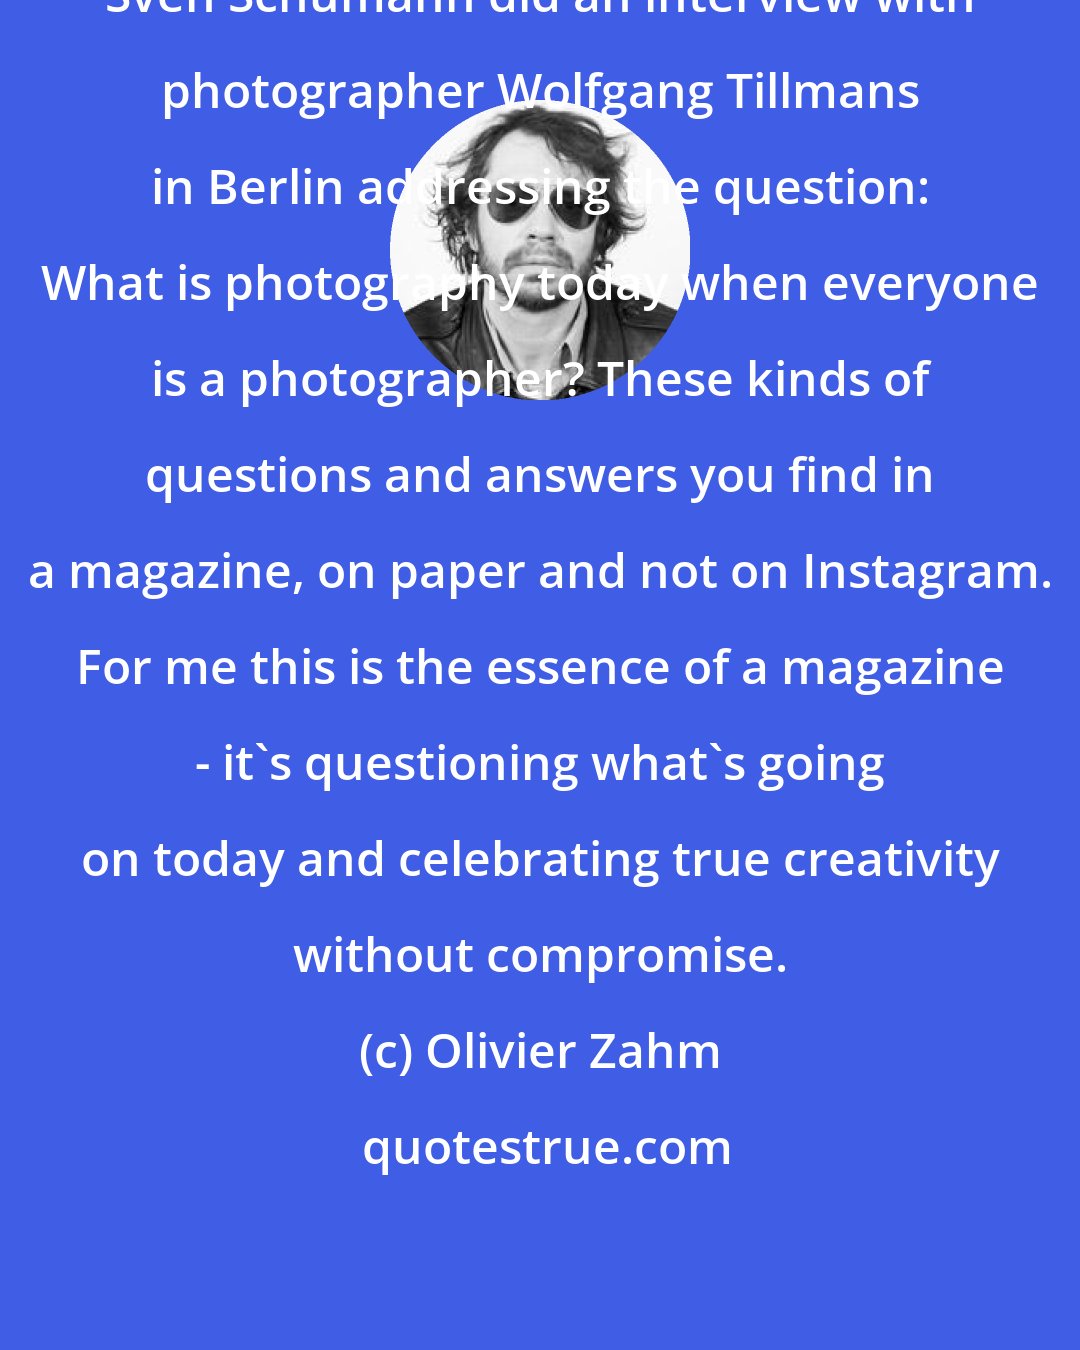 Olivier Zahm: Sven Schumann did an interview with photographer Wolfgang Tillmans in Berlin addressing the question: What is photography today when everyone is a photographer? These kinds of questions and answers you find in a magazine, on paper and not on Instagram. For me this is the essence of a magazine - it's questioning what's going on today and celebrating true creativity without compromise.